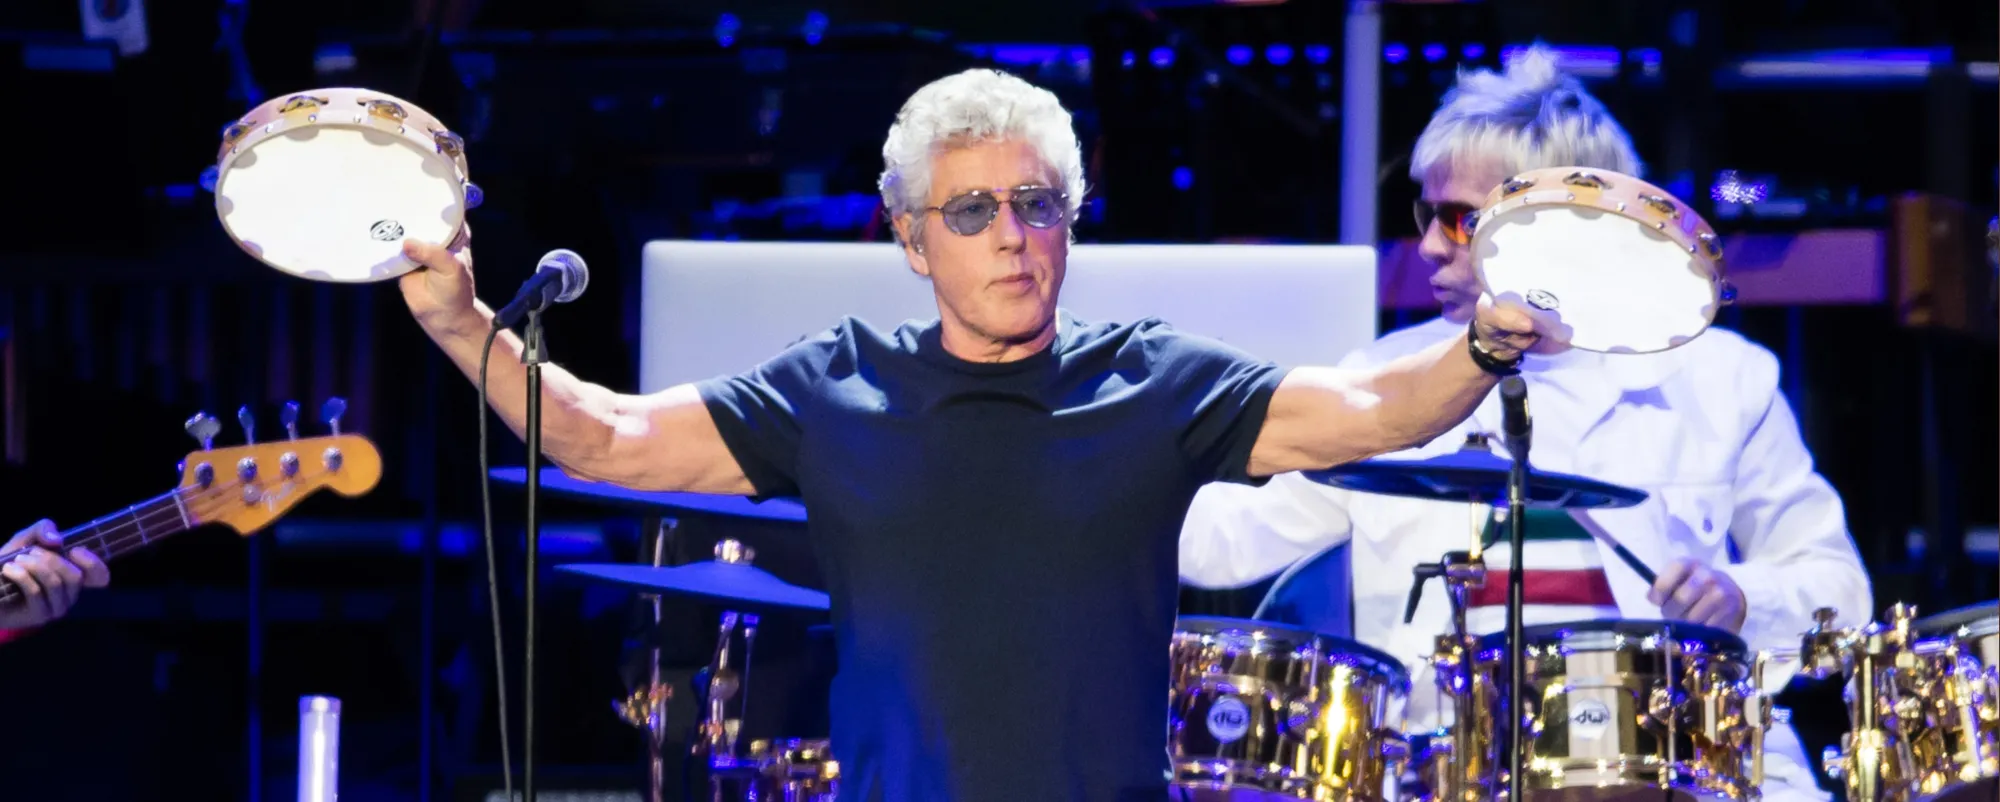 Roger Daltrey Shares His Top 3 Most Memorable Concerts with The Who